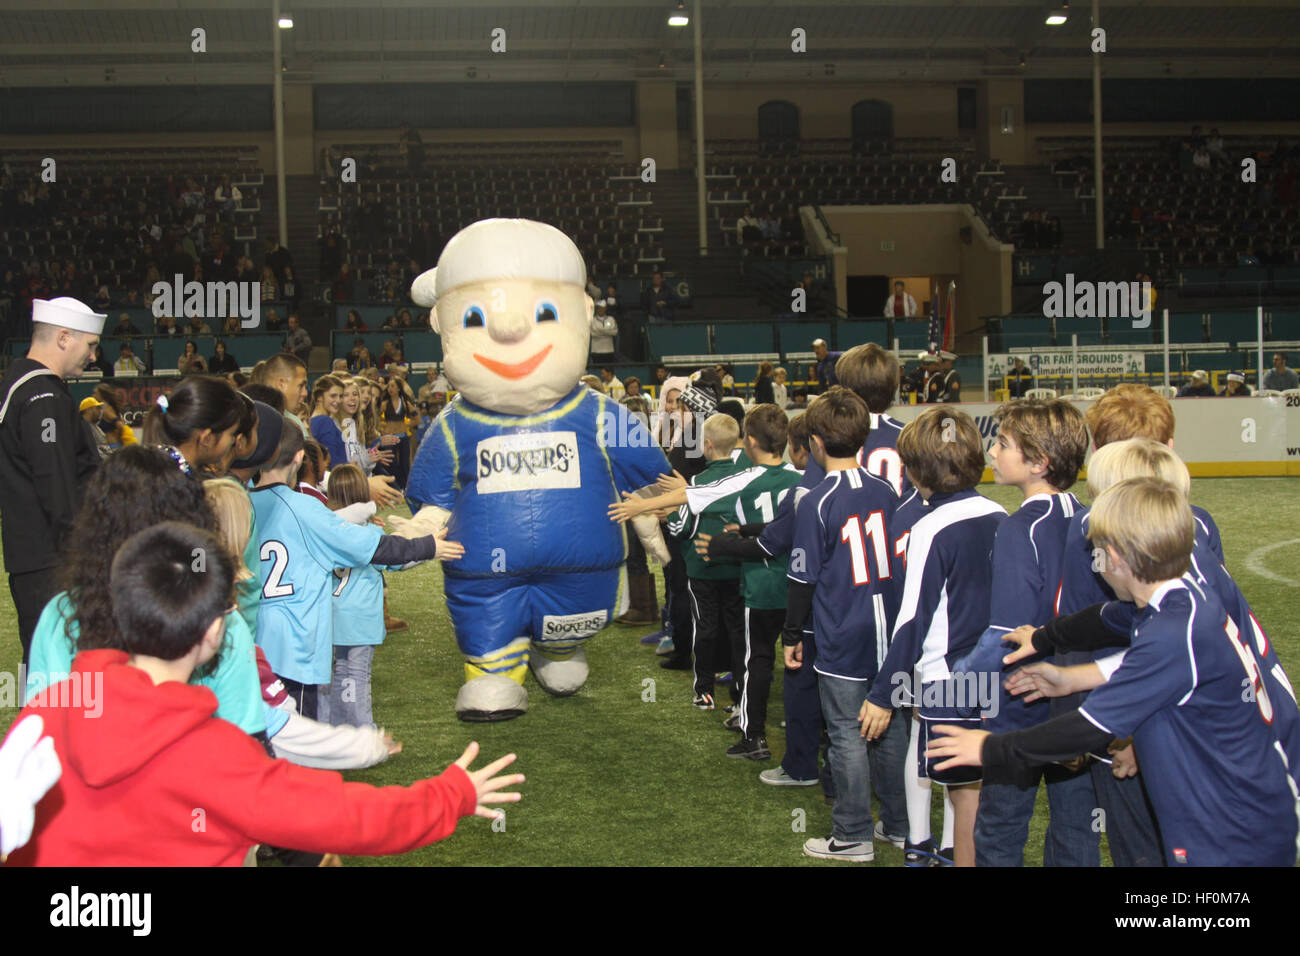 The San Diego Sockers mascot runs through a line of youth soccer players  during the San Diego Sockers entrance to the field before their game  against the Tacoma Stars at Del Mar